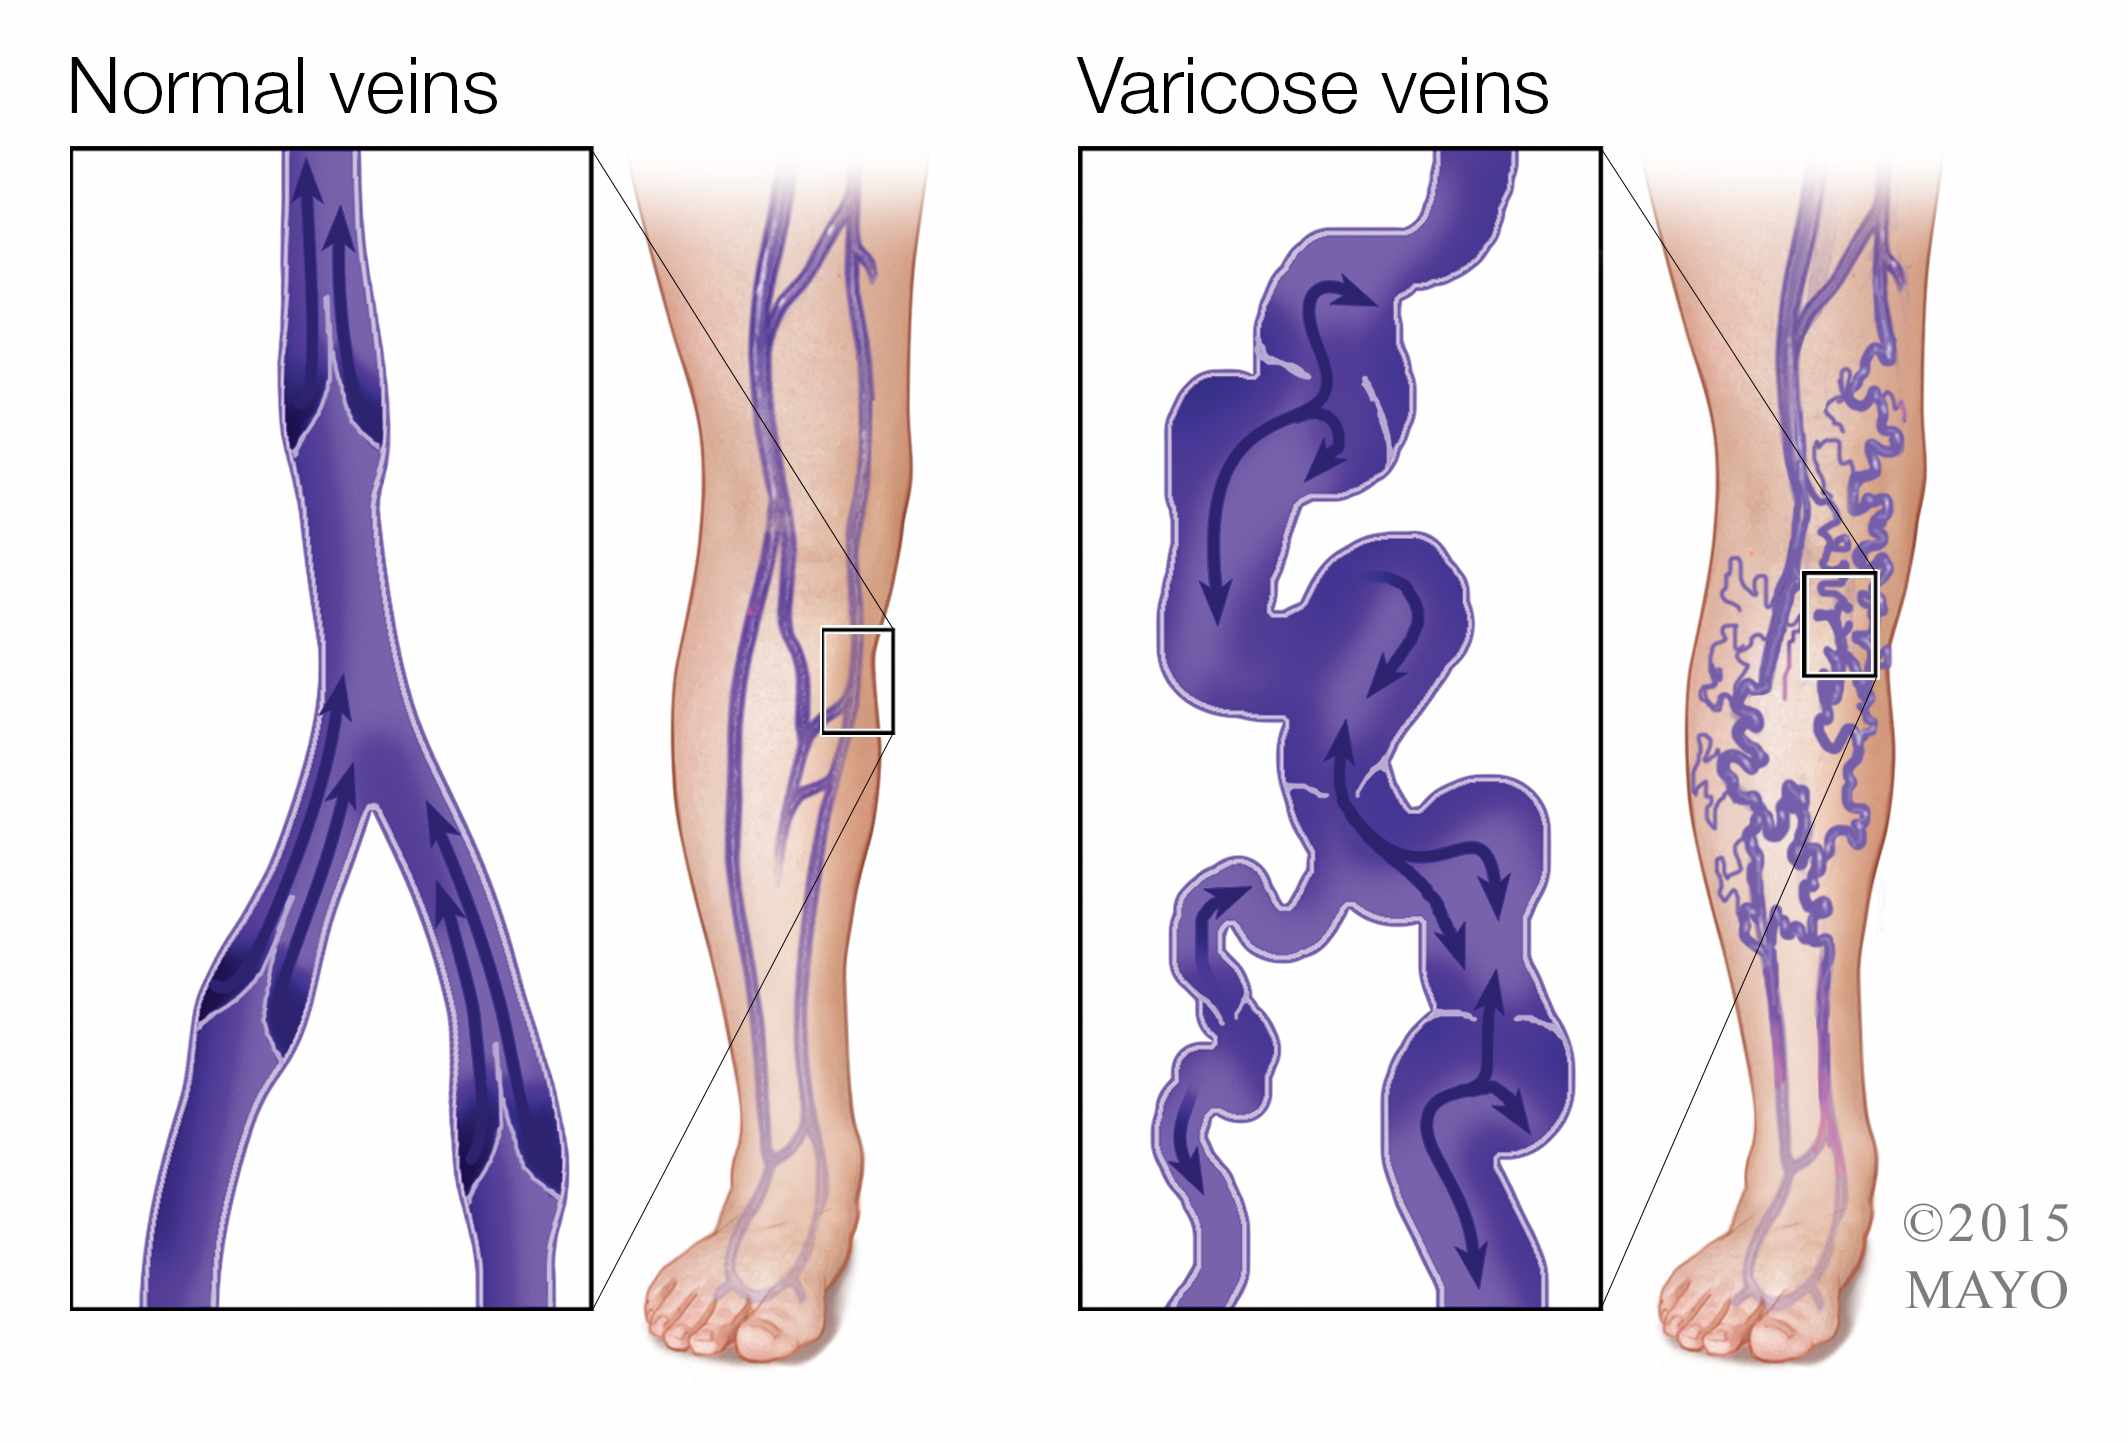 What to Wear and Not to Wear for Varicose Veins